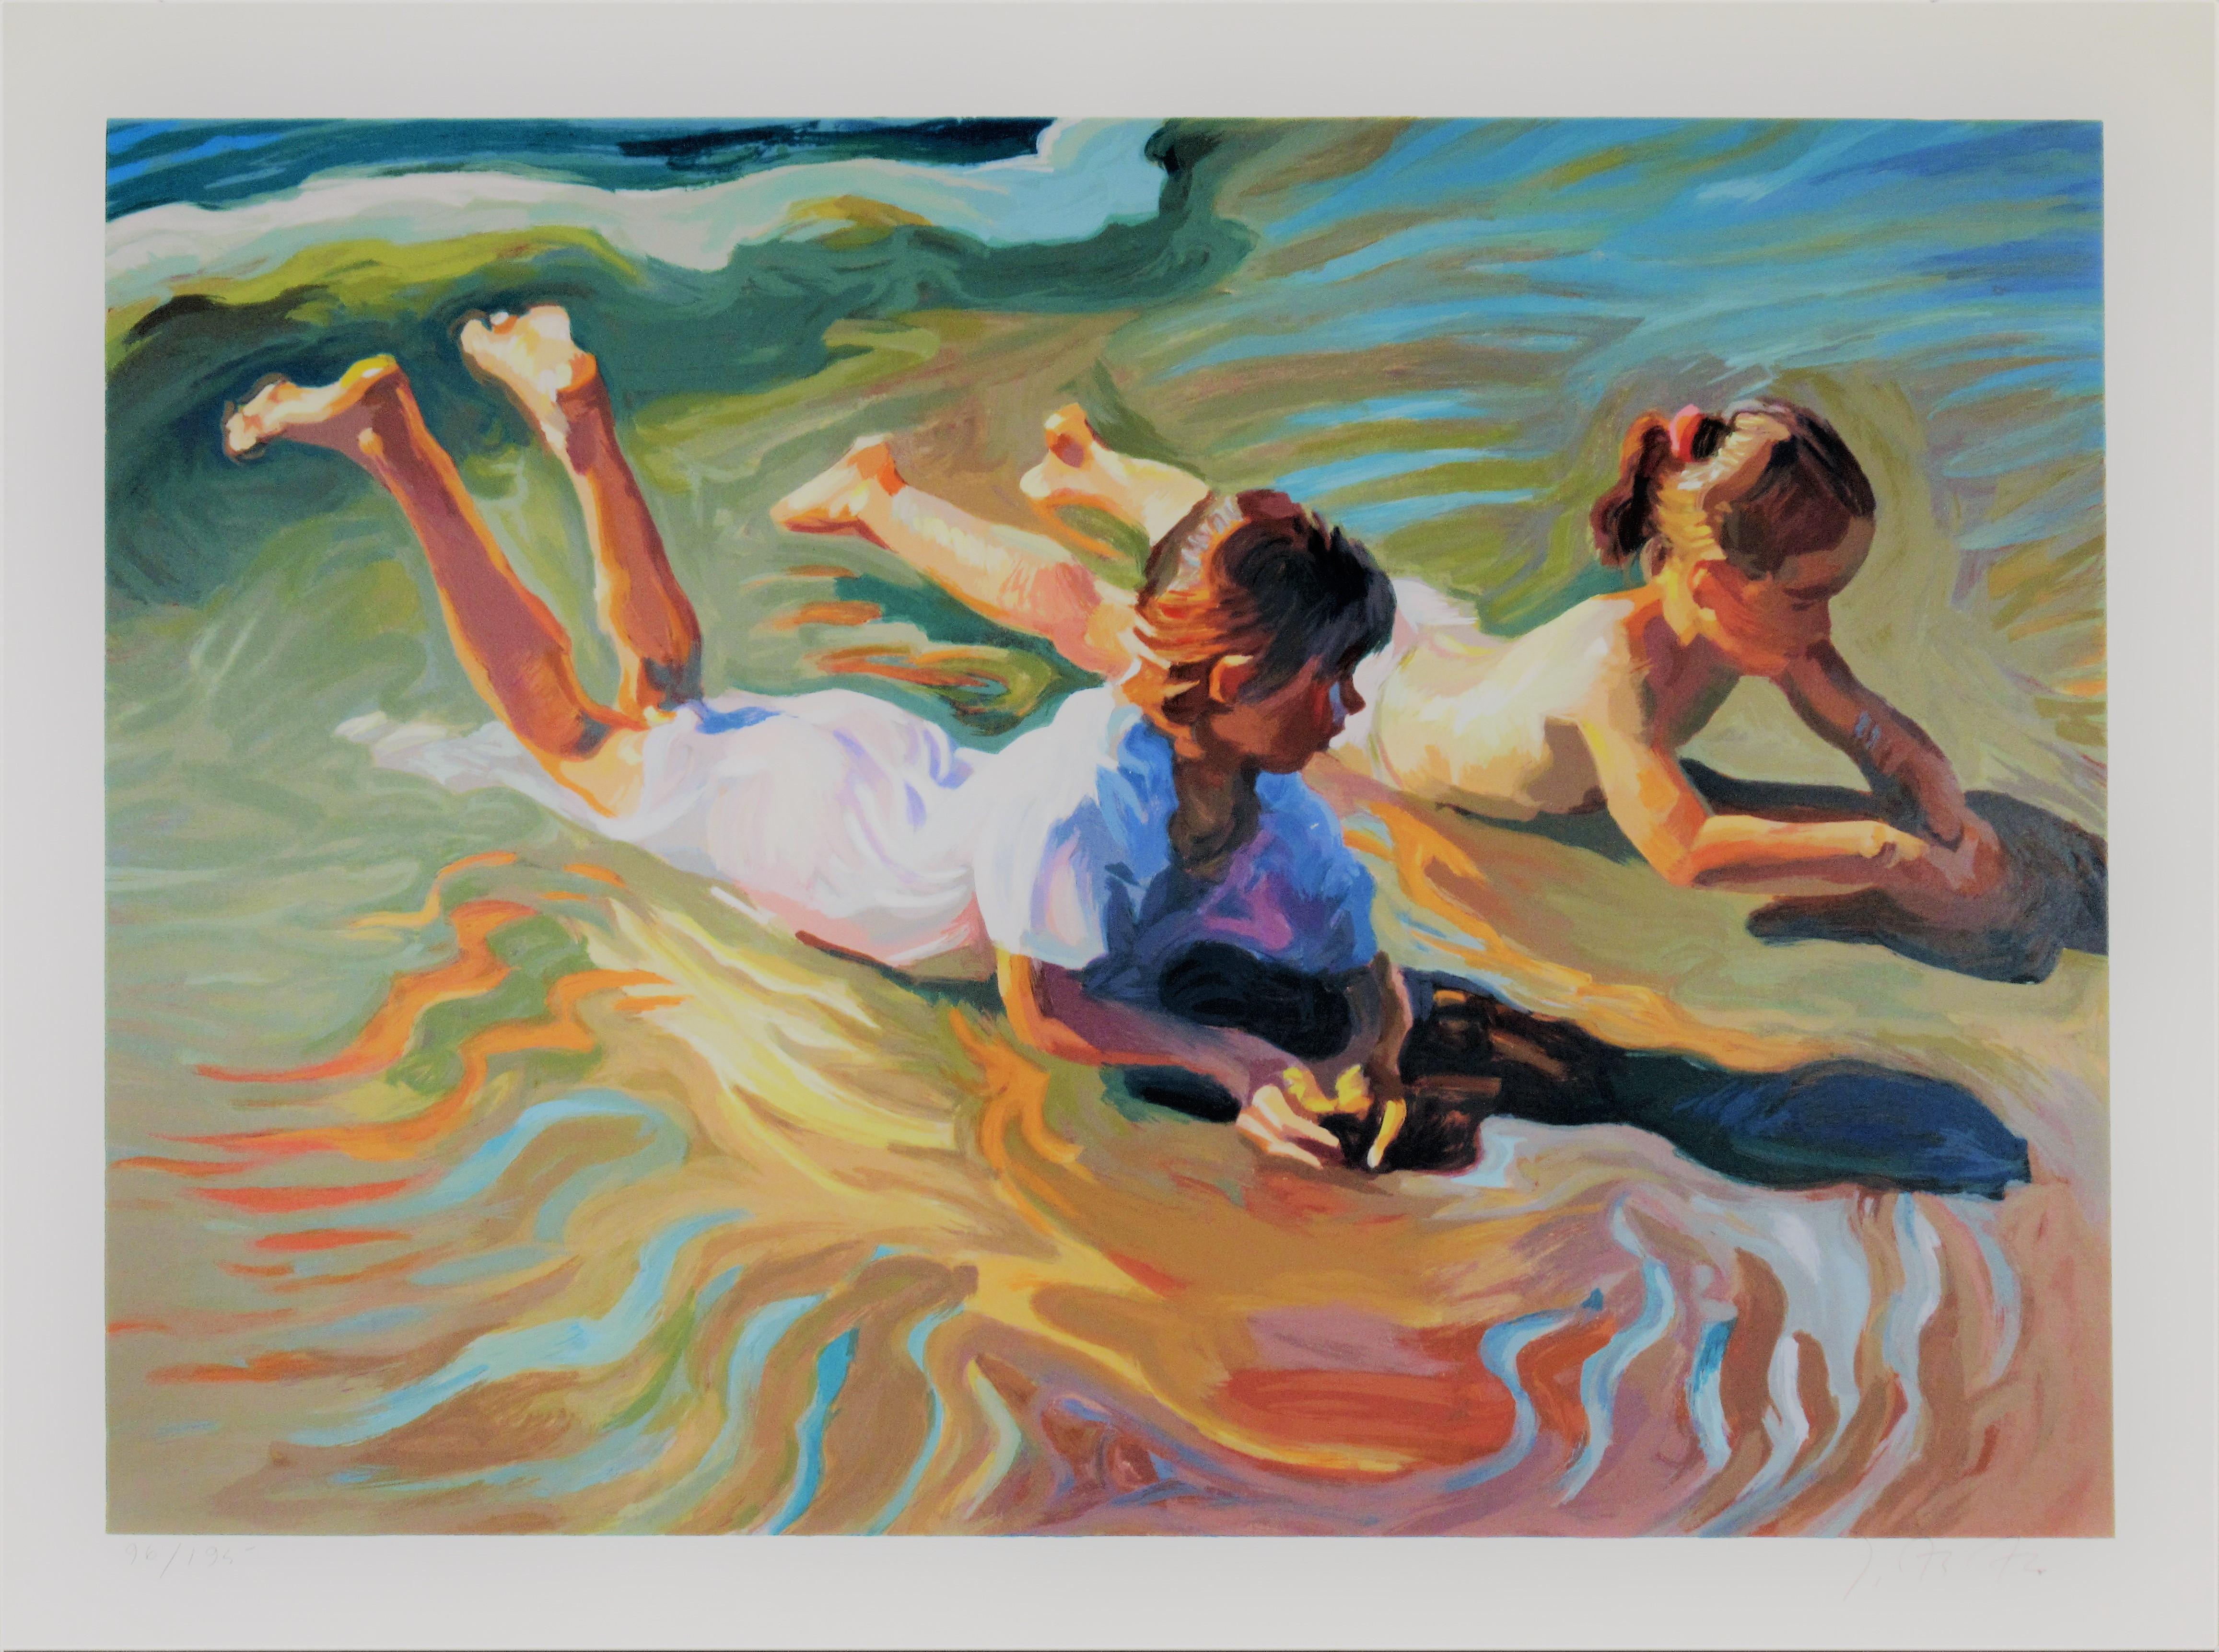 John Asaro Figurative Print - Two Young Girls at the Beach, large color seigraph